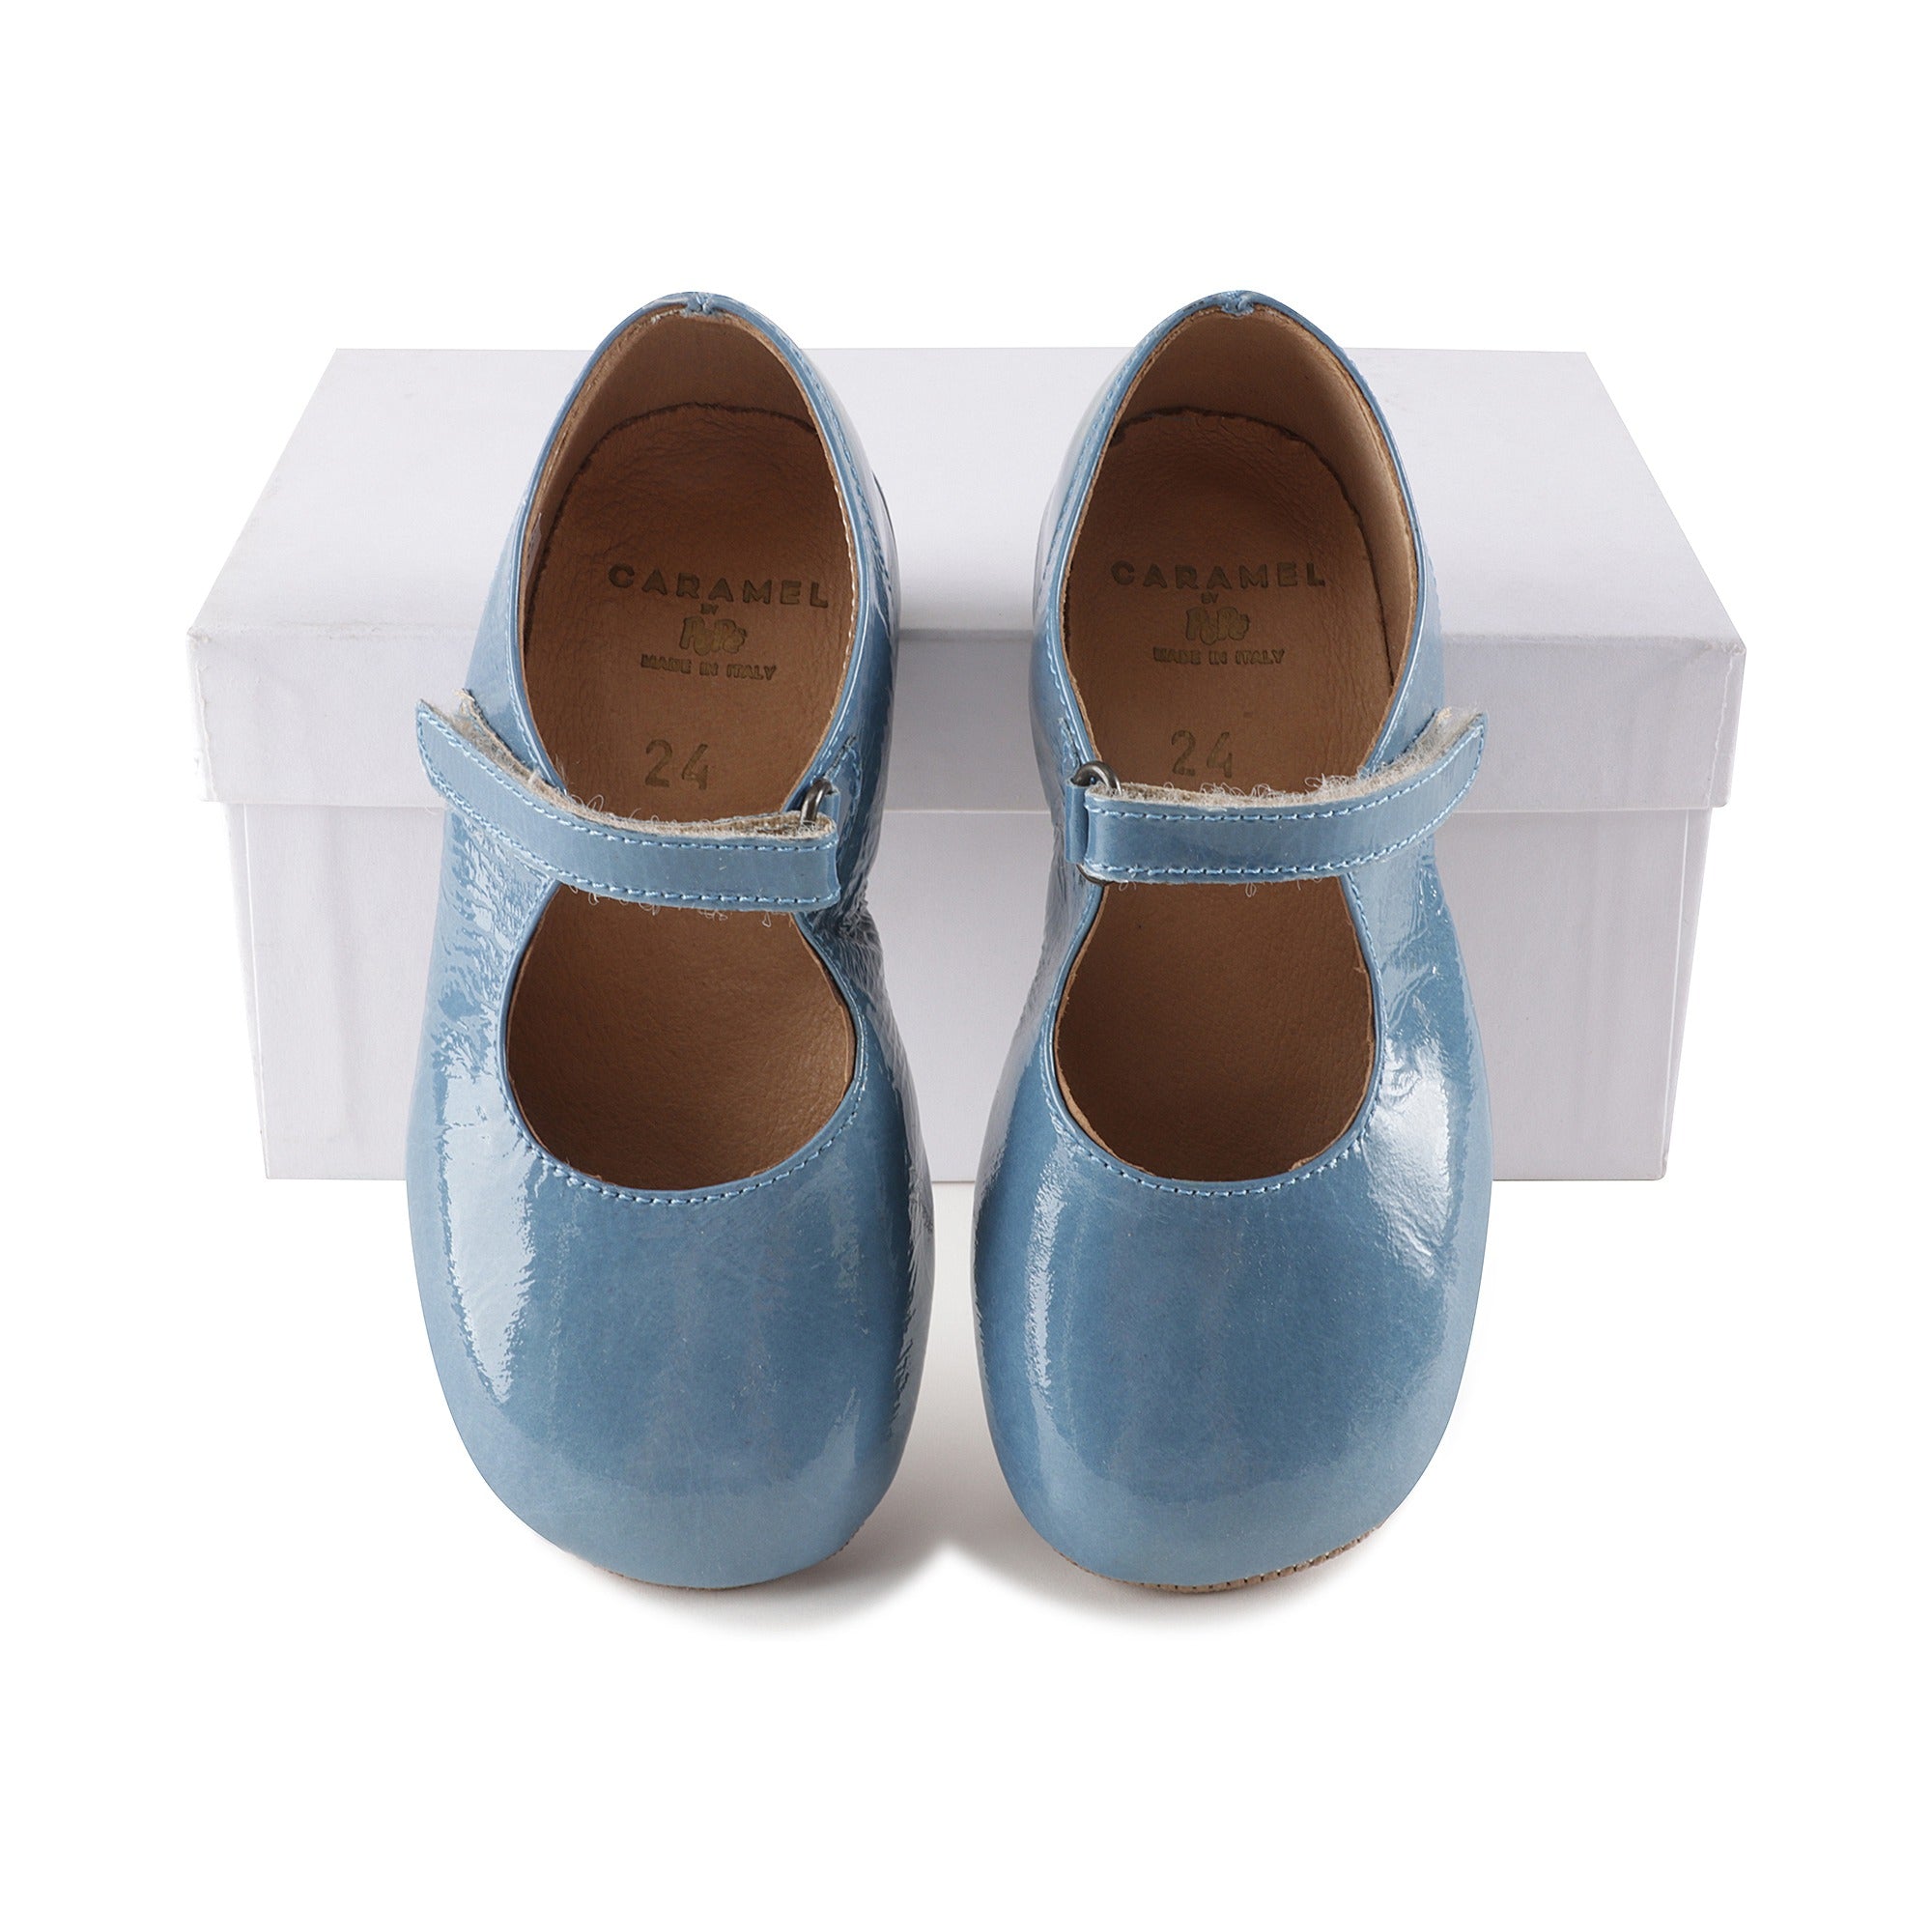 Girls Blue Leather Shoes